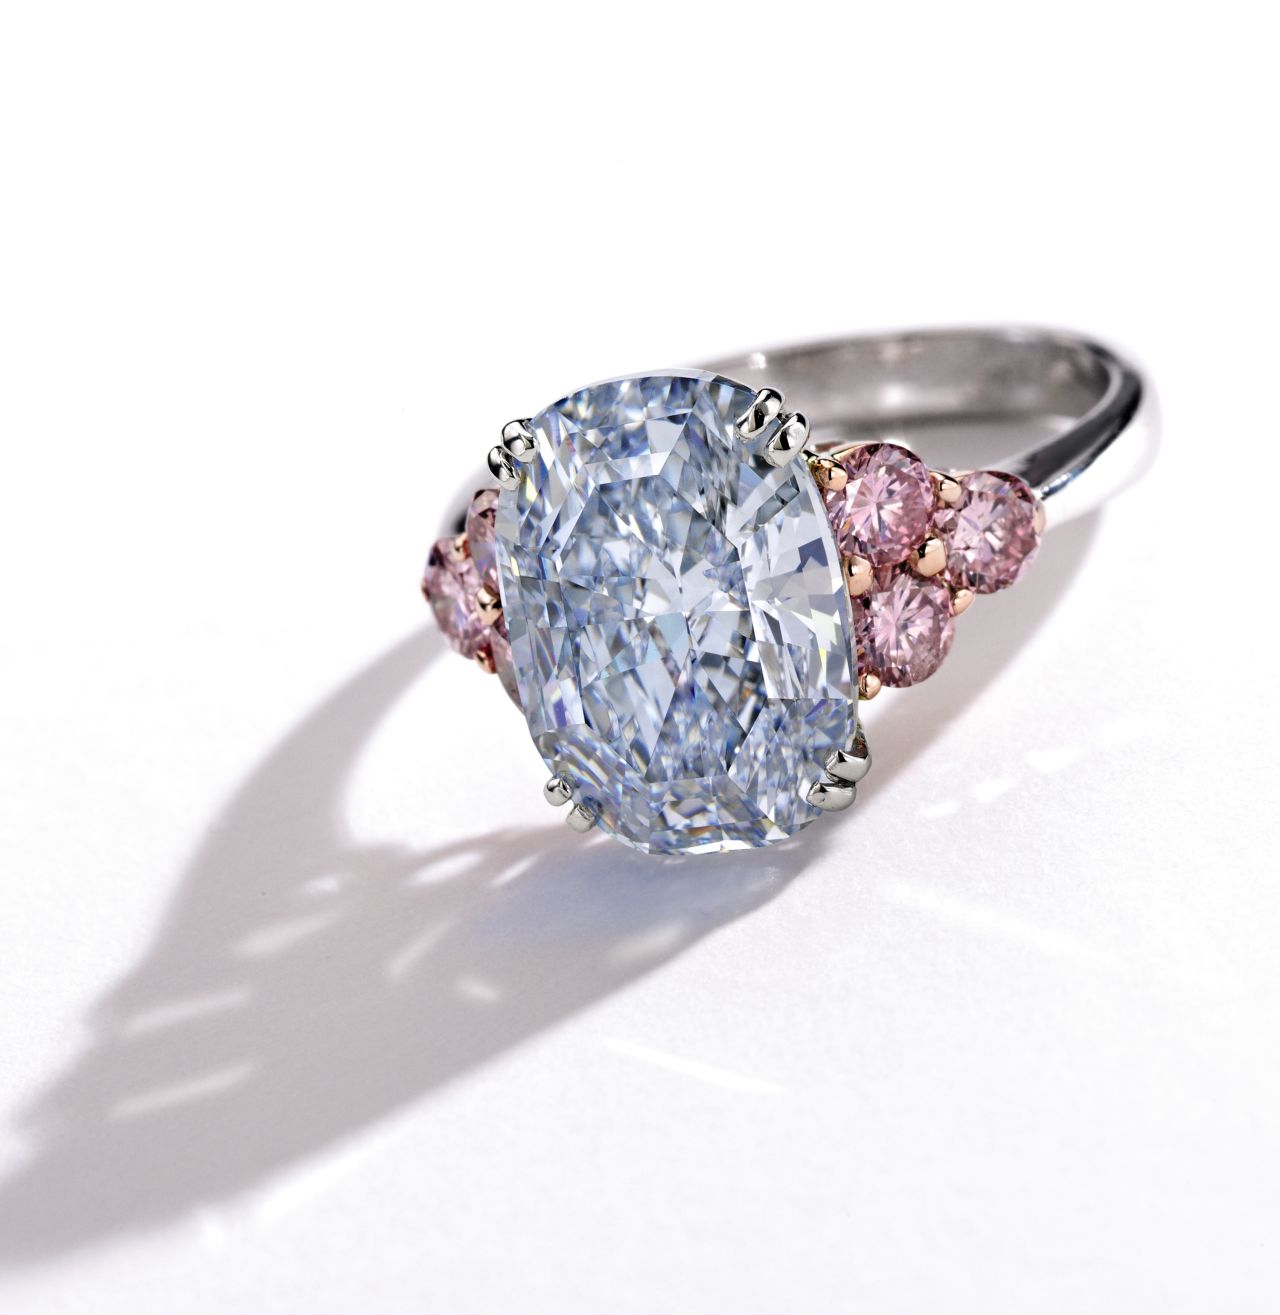 Other colored diamonds include The Monarch Blue Diamond ring, which has a blue diamond surrounded by six pink ones. It had been expected to sell for up to $4.5M.